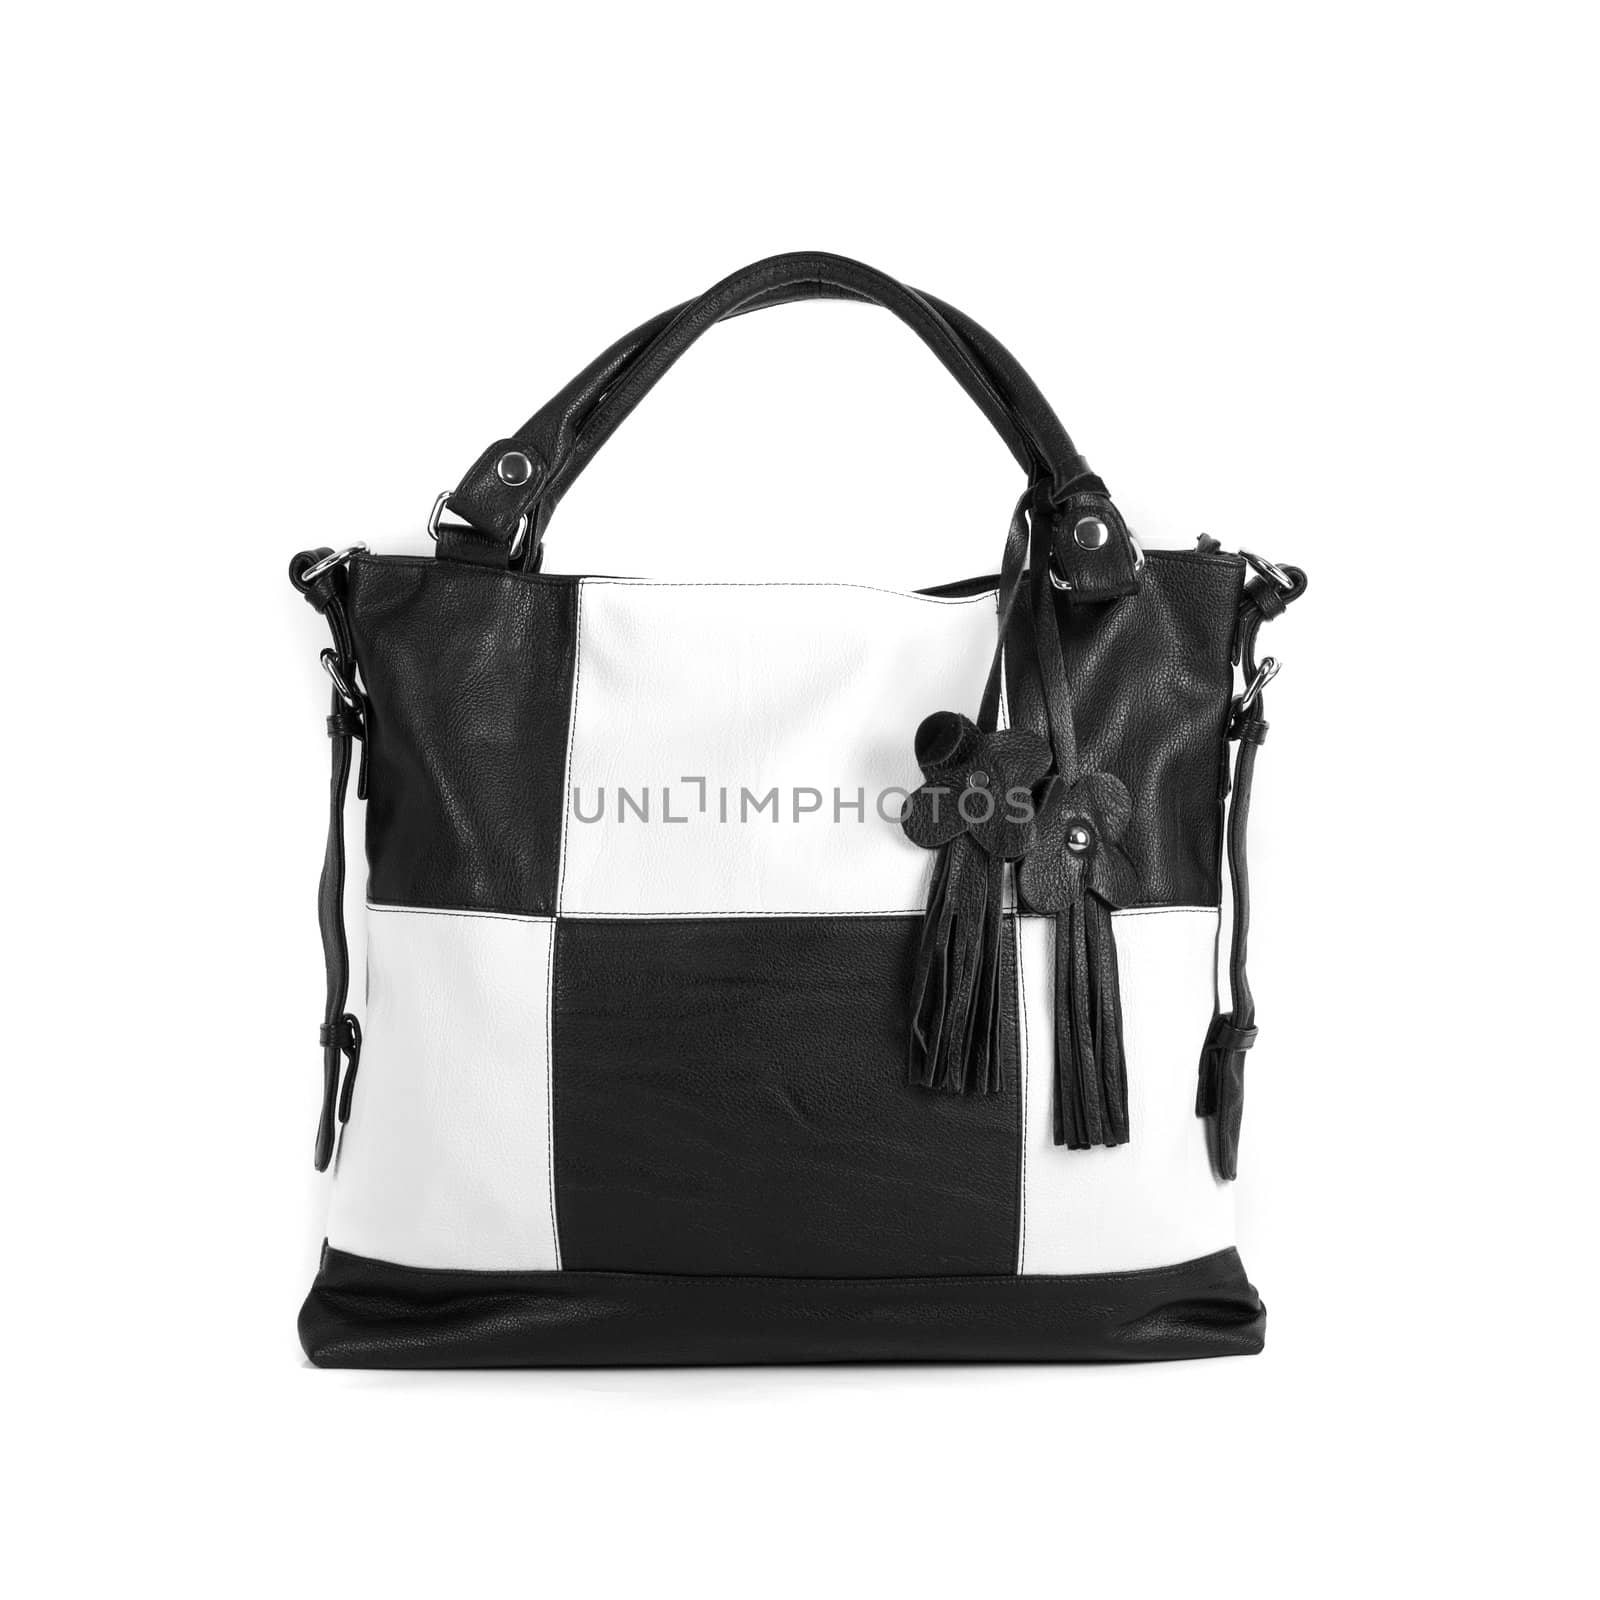 Black and white bag by rusak